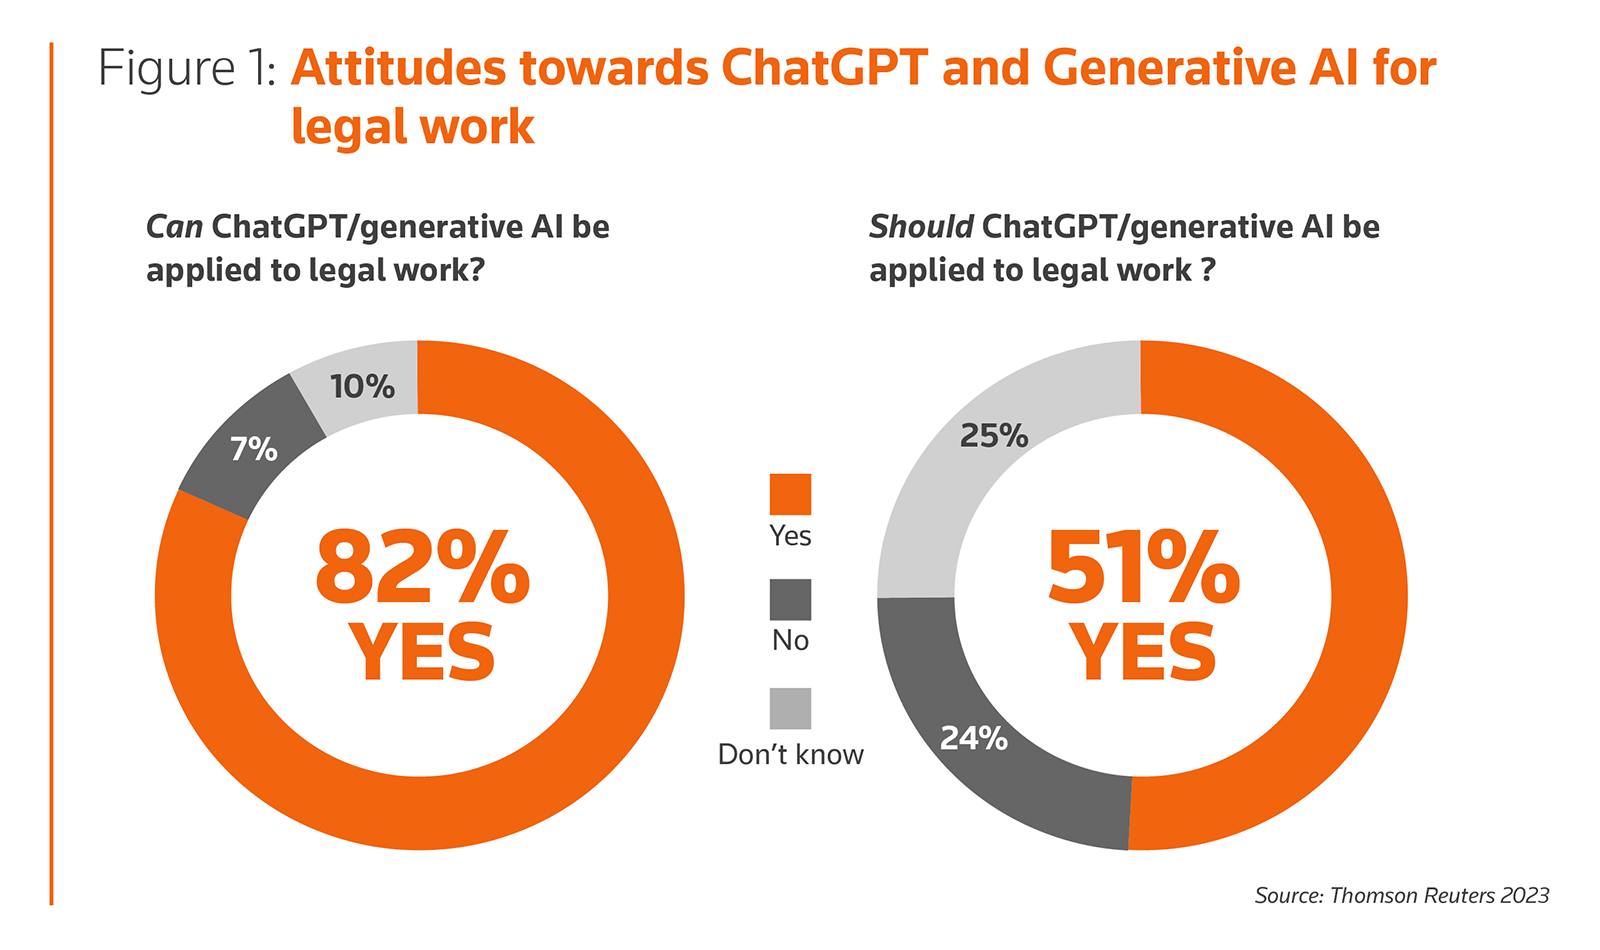 Chart illustrating attitudes towards ChatGPT and Generative AI for legal work